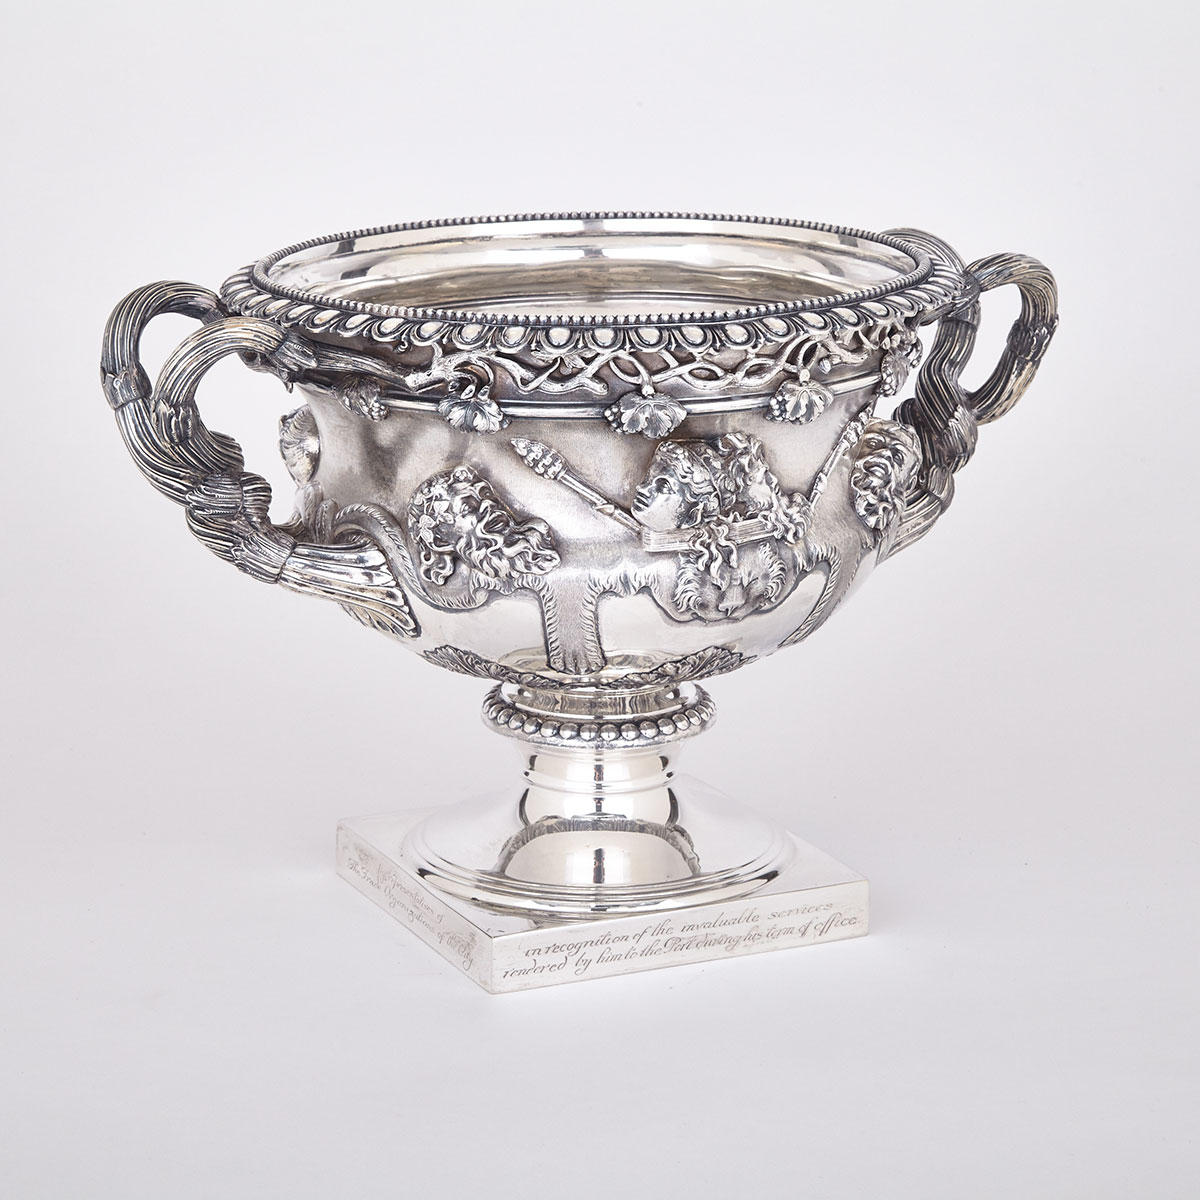 ENGLISH SILVER ‘WARWICK’ VASE, EDWARD BARNARD & SONS, LONDON, 1911 with entwined vine handles, - Image 2 of 6